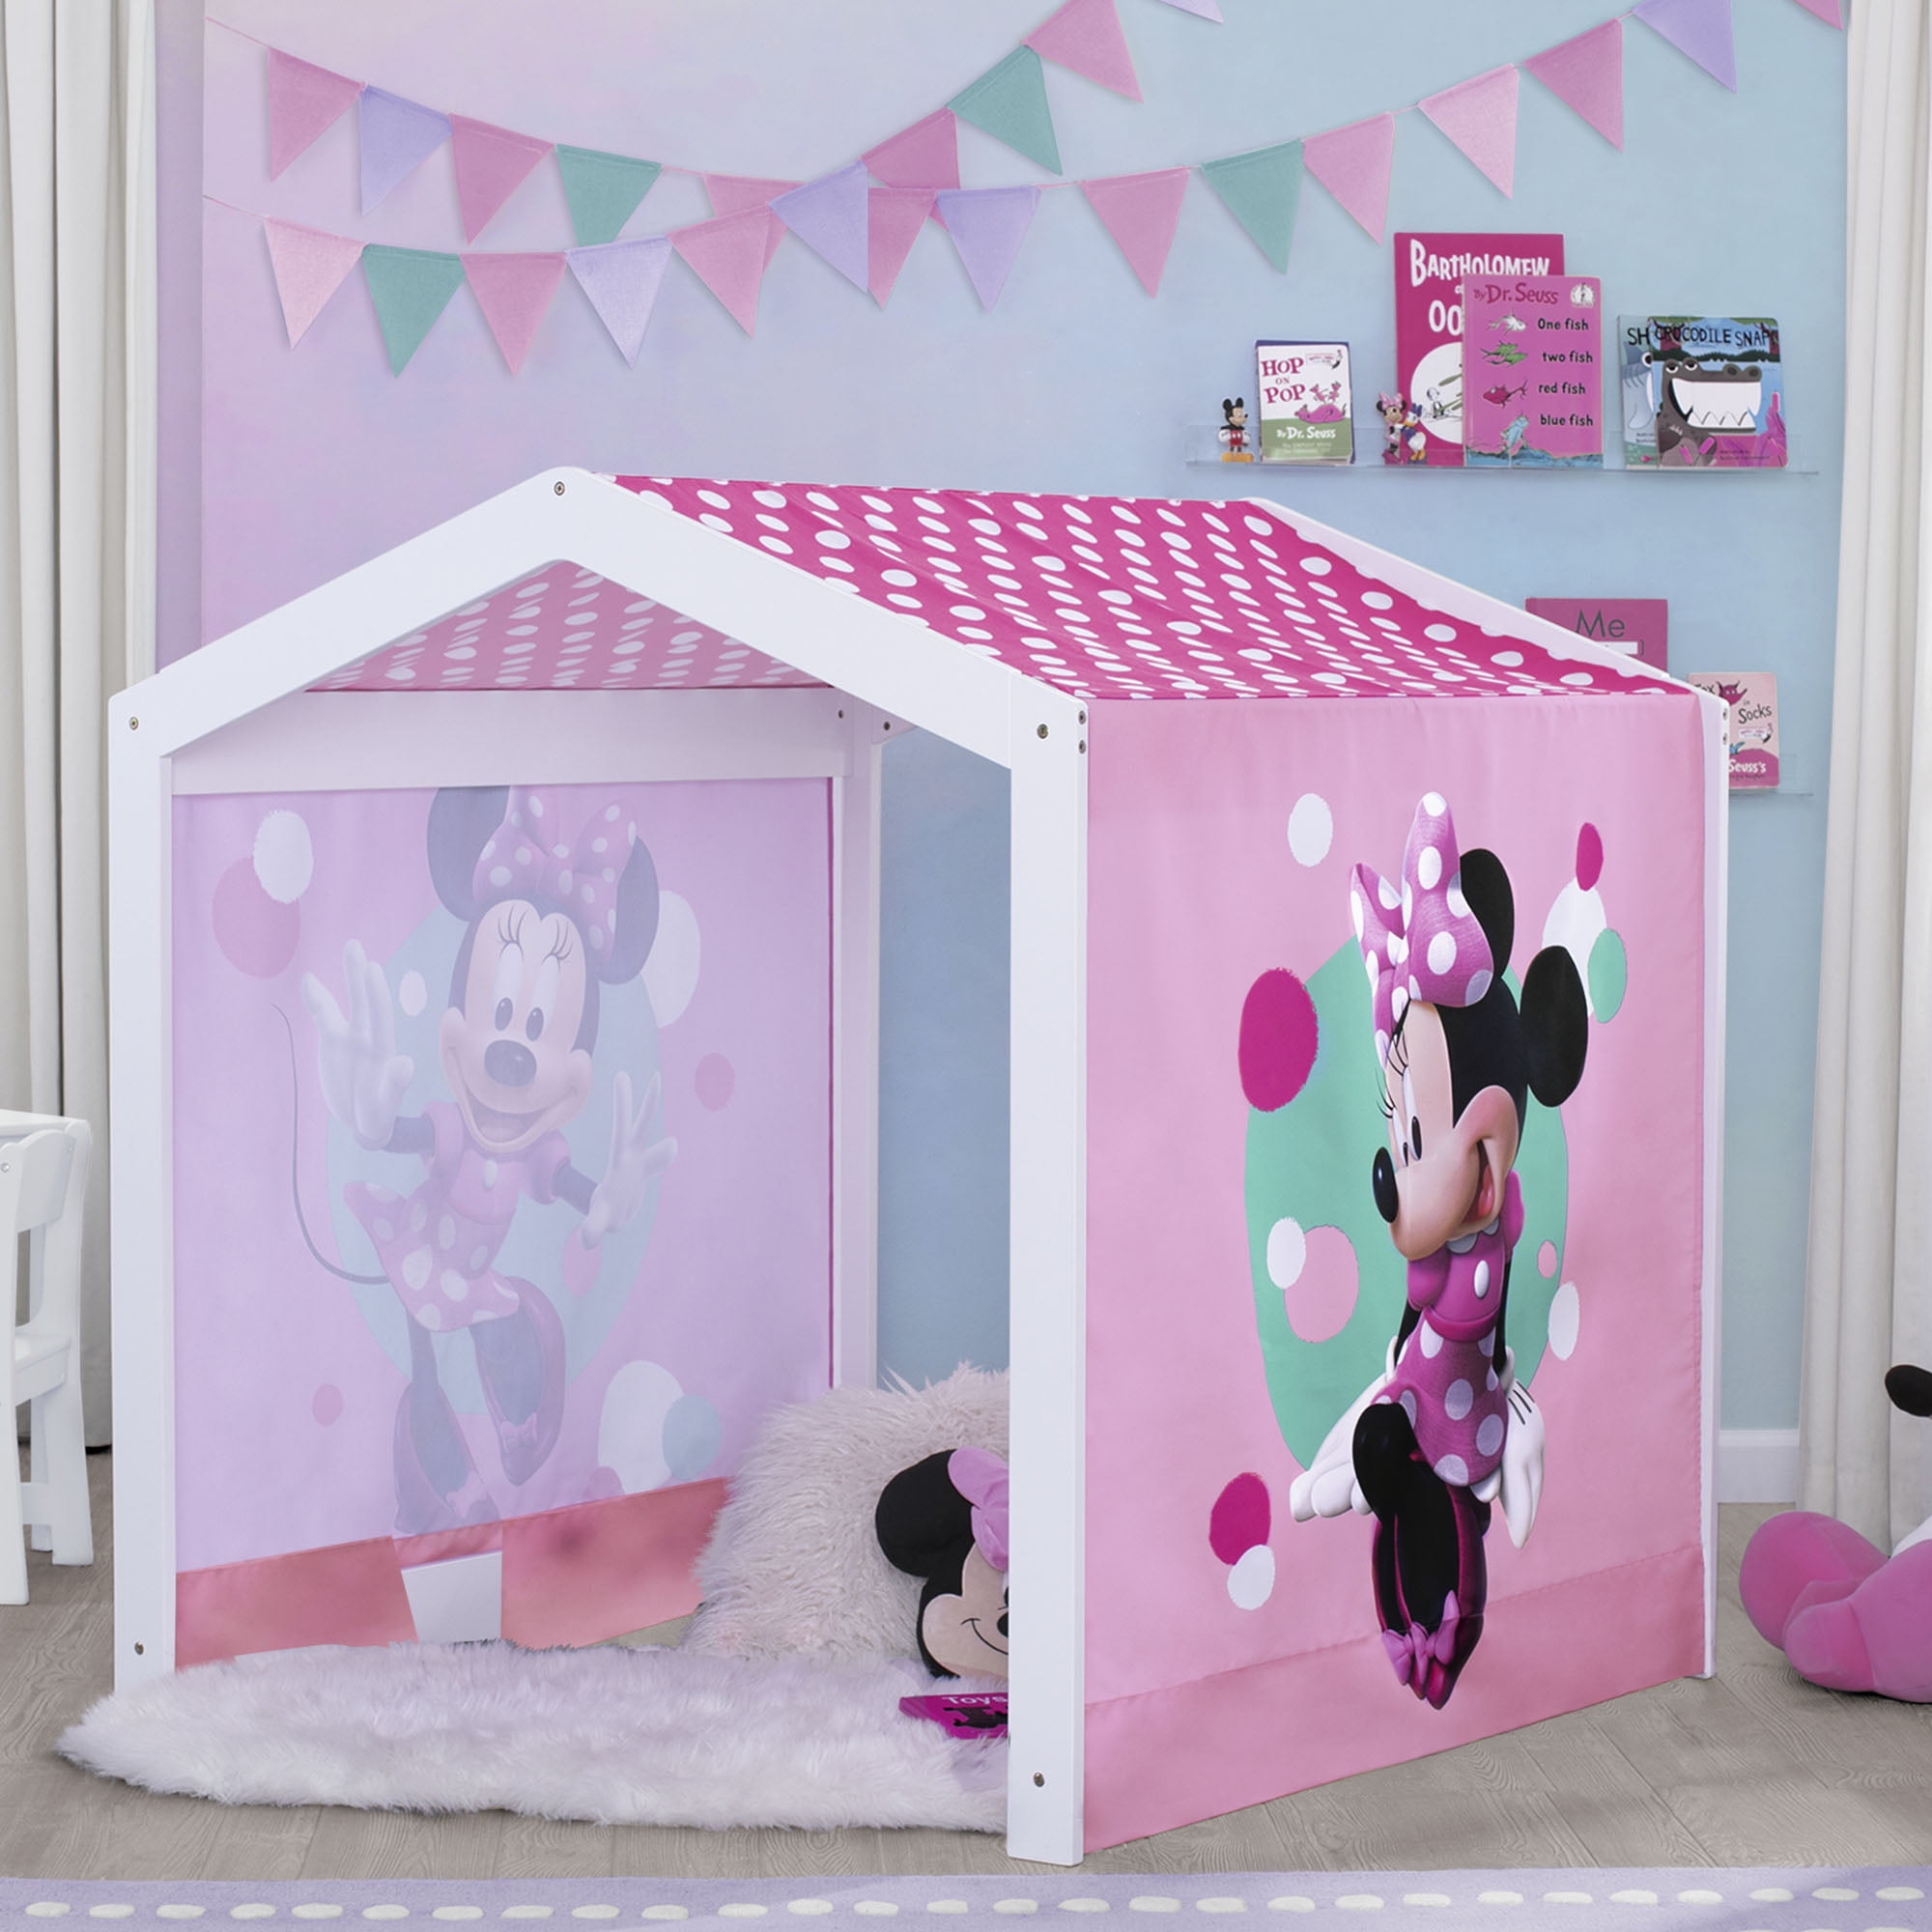 KIDS INDOOR MINNIE MOUSE TEEPEE PLAY TENT OUTDOOR PLAY OFFICIAL NEW 